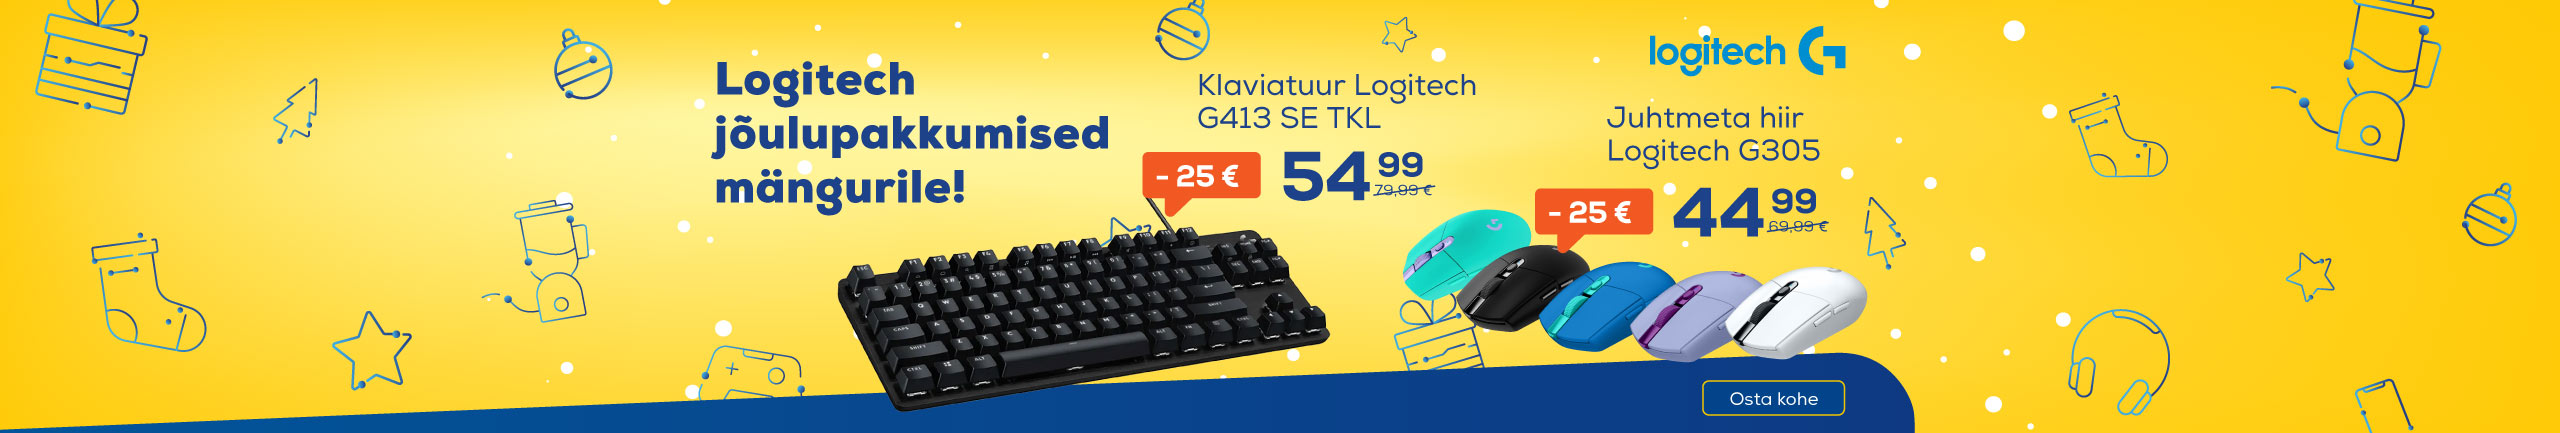 Logitech Christmas offers for gamers!